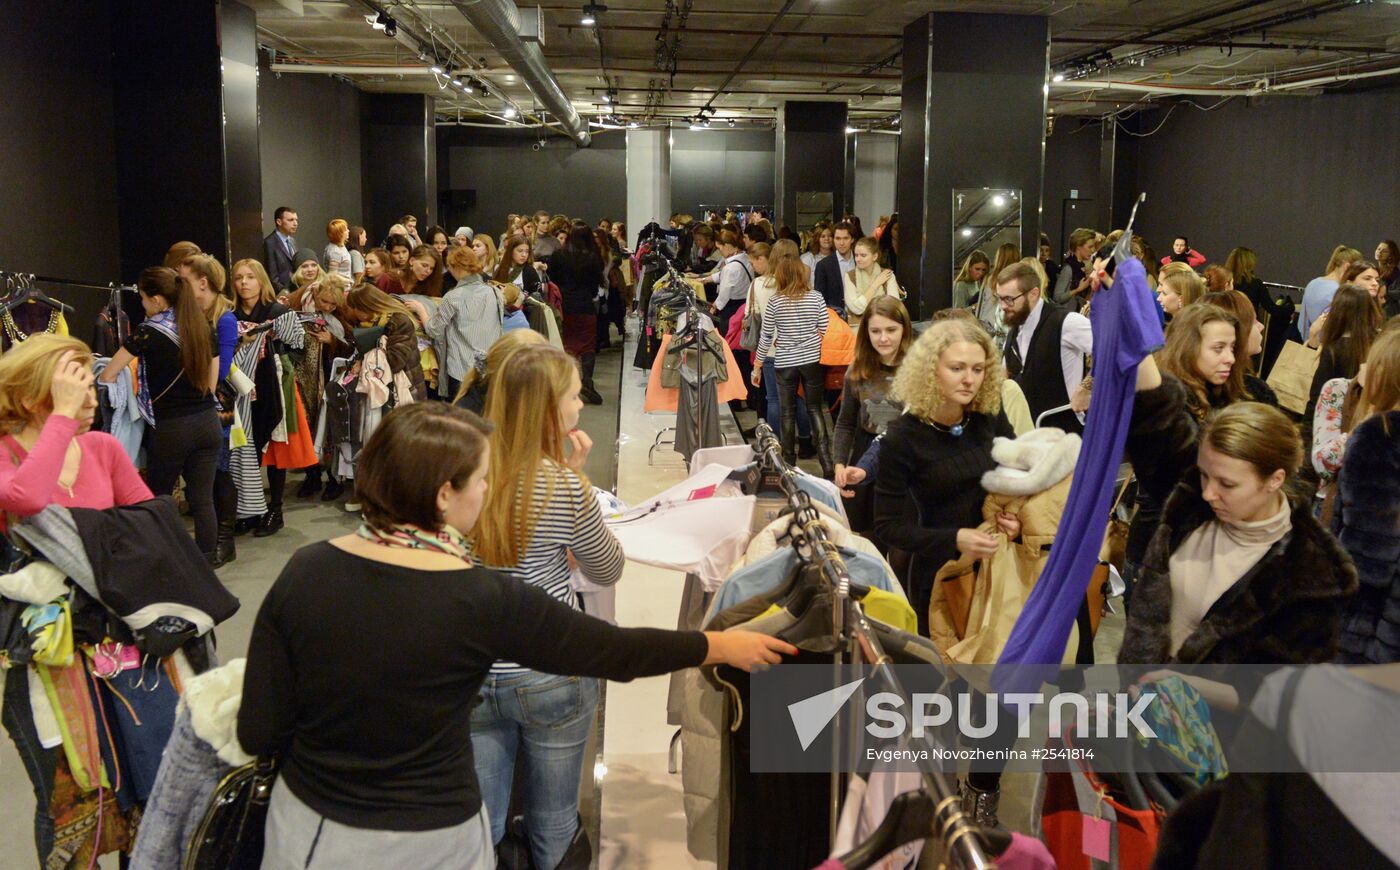 Angels Charity Sale, charity sale of Russian celebrities' designer clothes